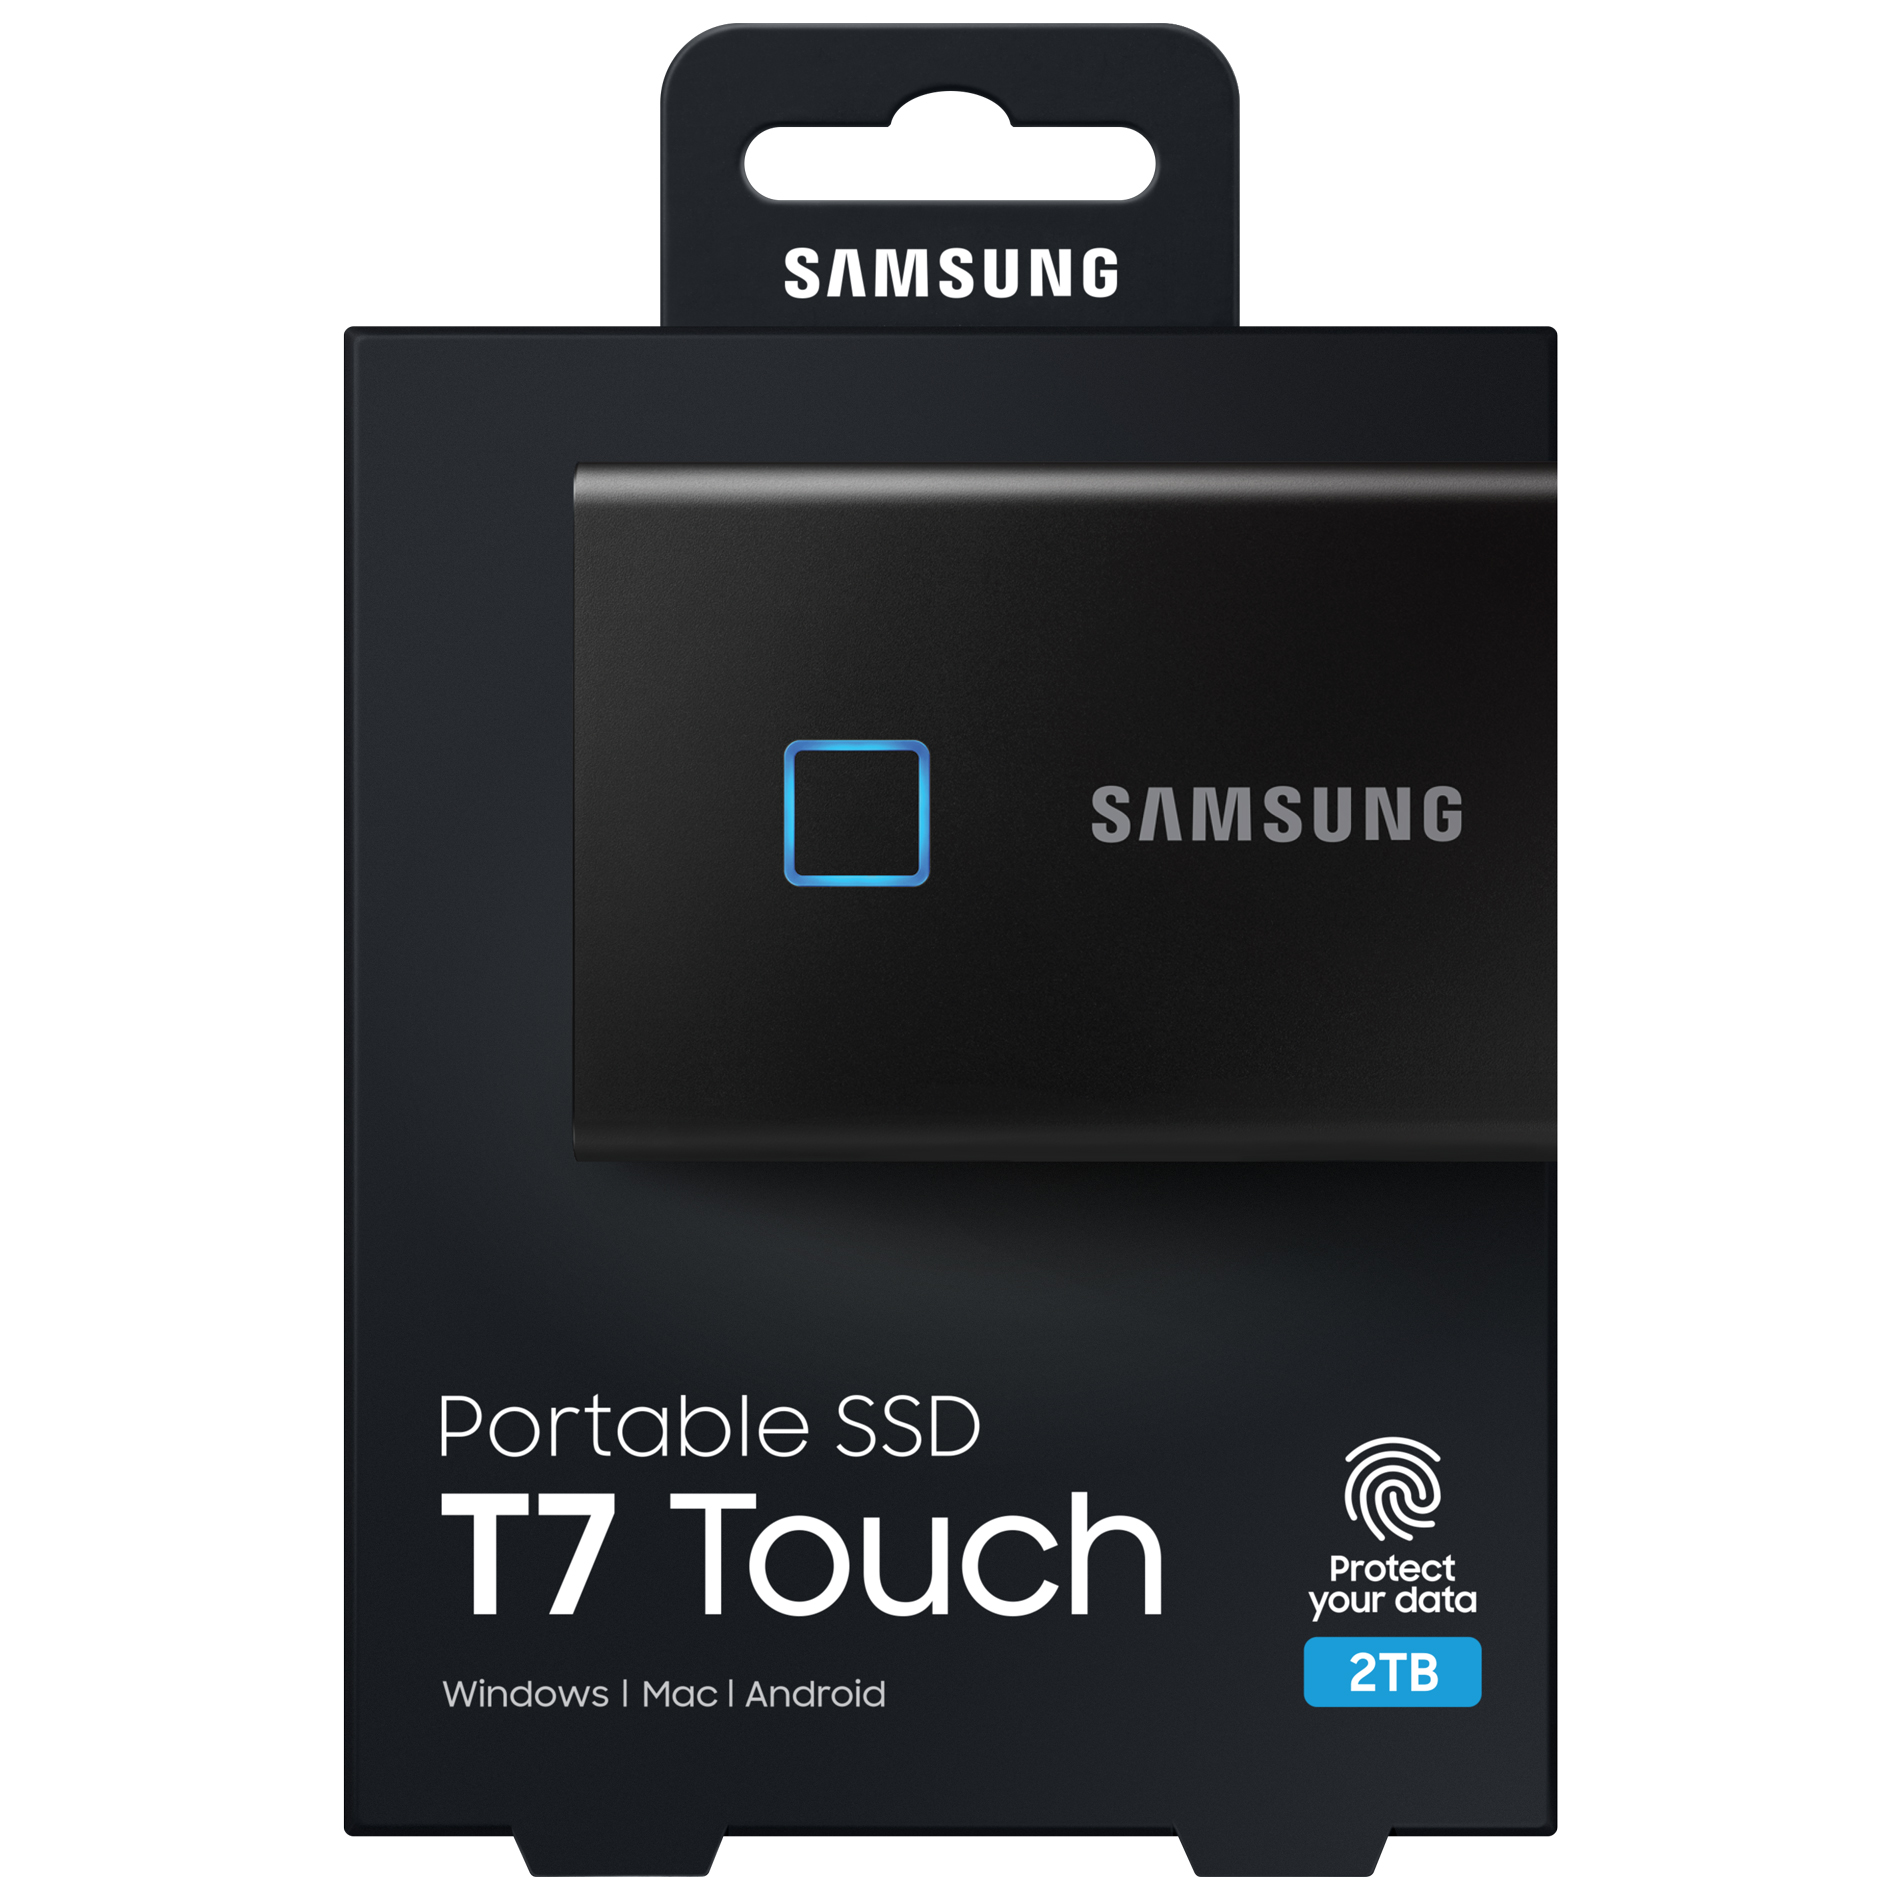 SSD Samsung T7 Touch 2TB - MU-PC2T0S/WW (2.5 inch USB -C, Silver, Up to 1,050MB/s)